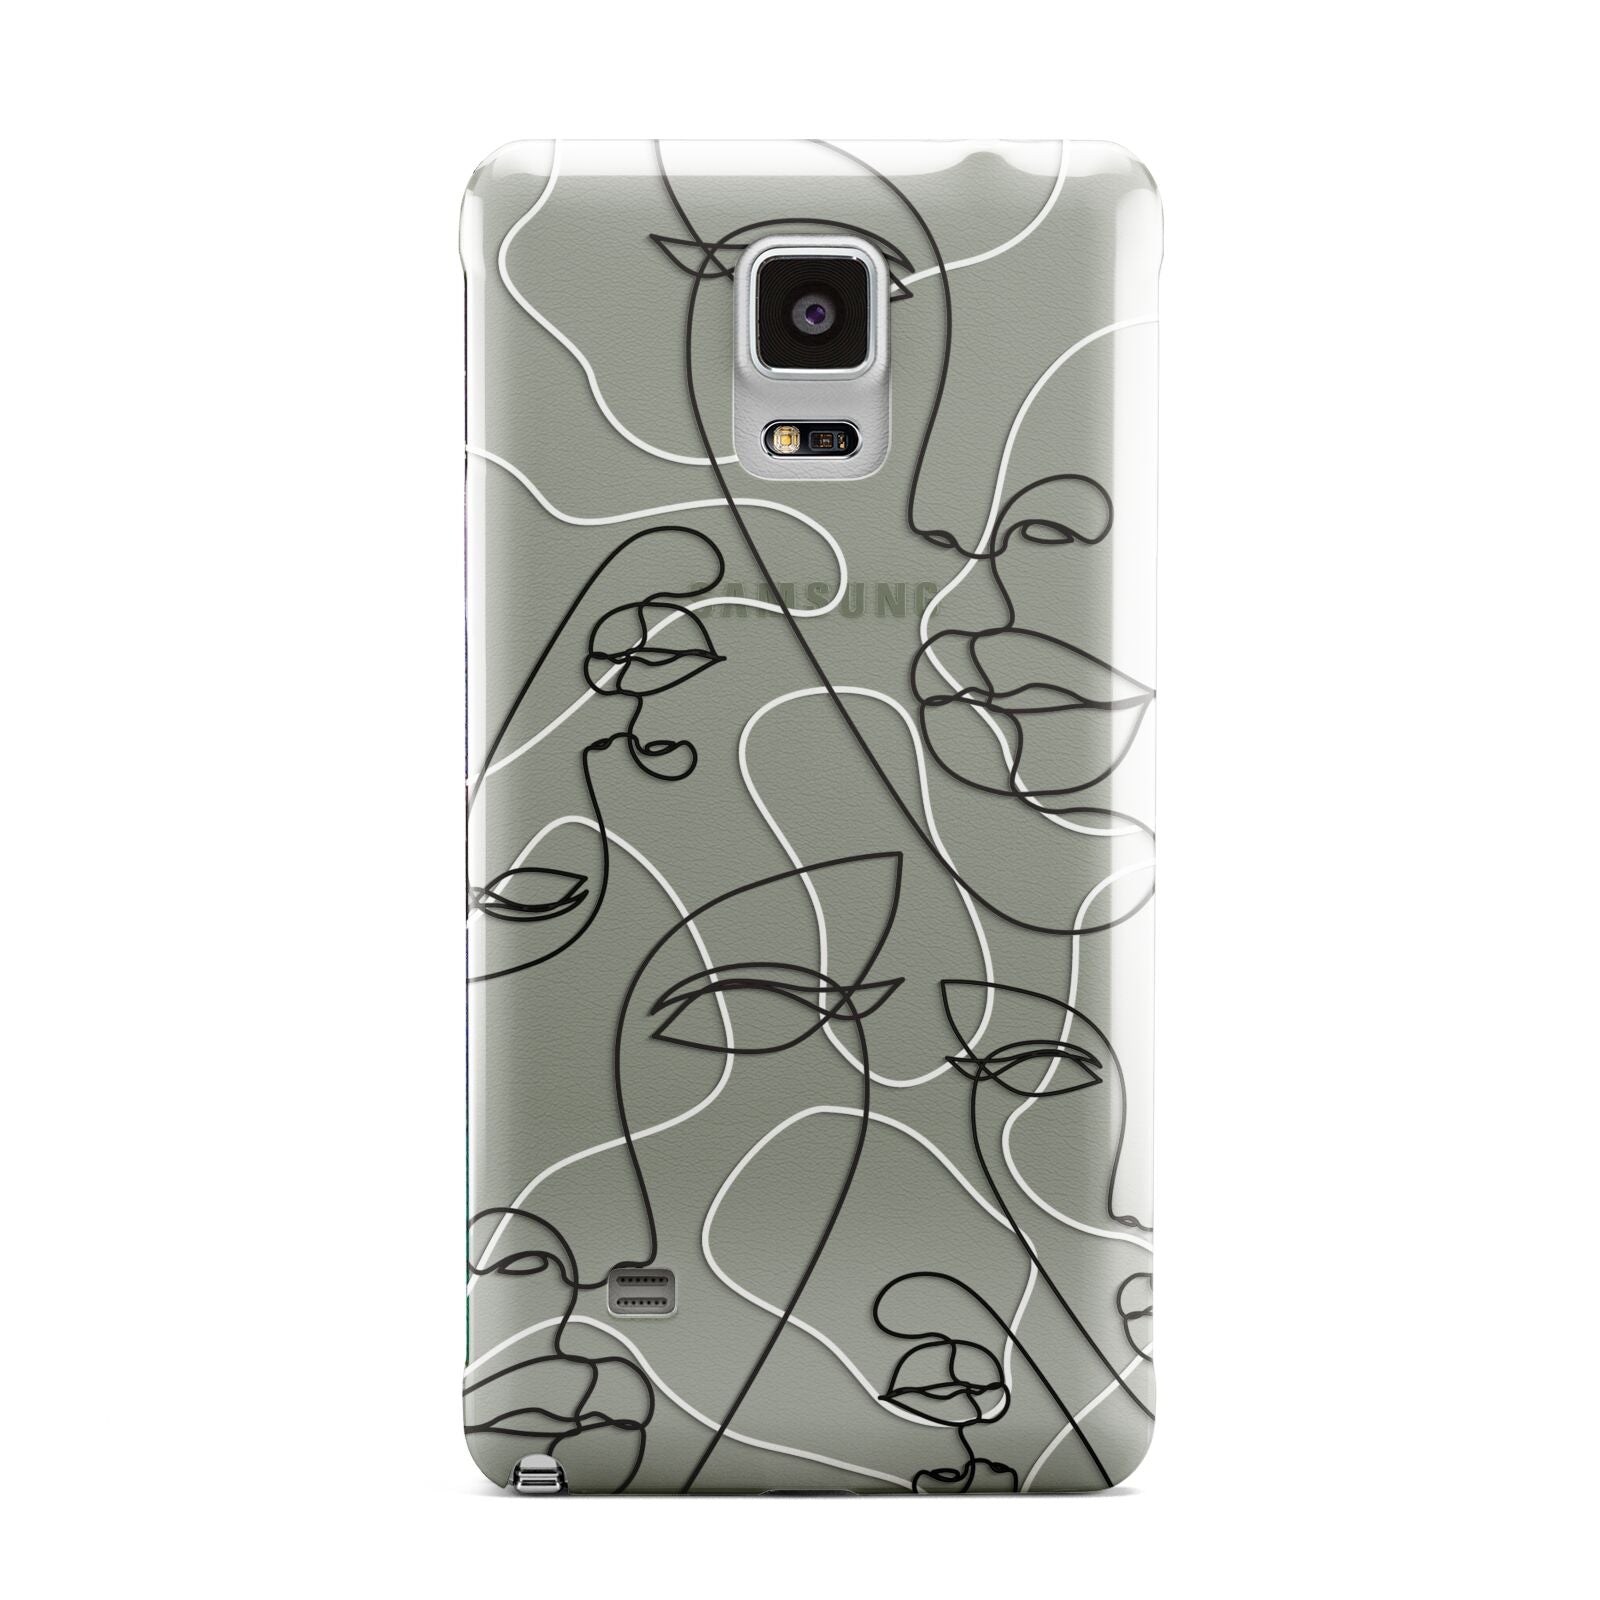 Abstract Face Samsung Galaxy Note 4 Case